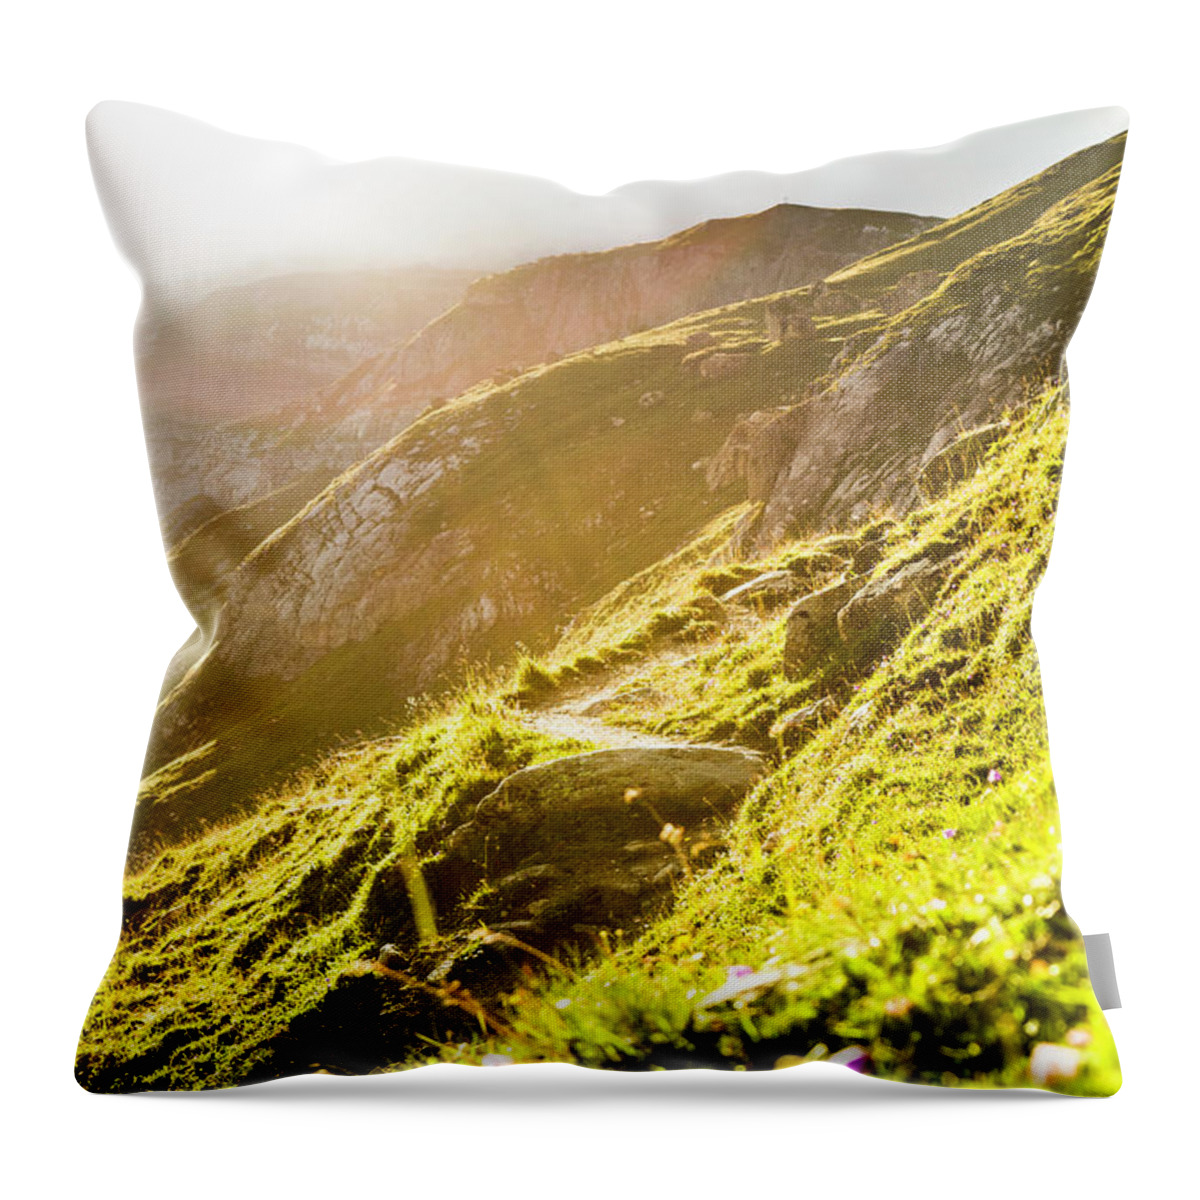 Tranquility Throw Pillow featuring the photograph Sun Rising Over Grassy Rural Hillside #3 by Manuel Sulzer